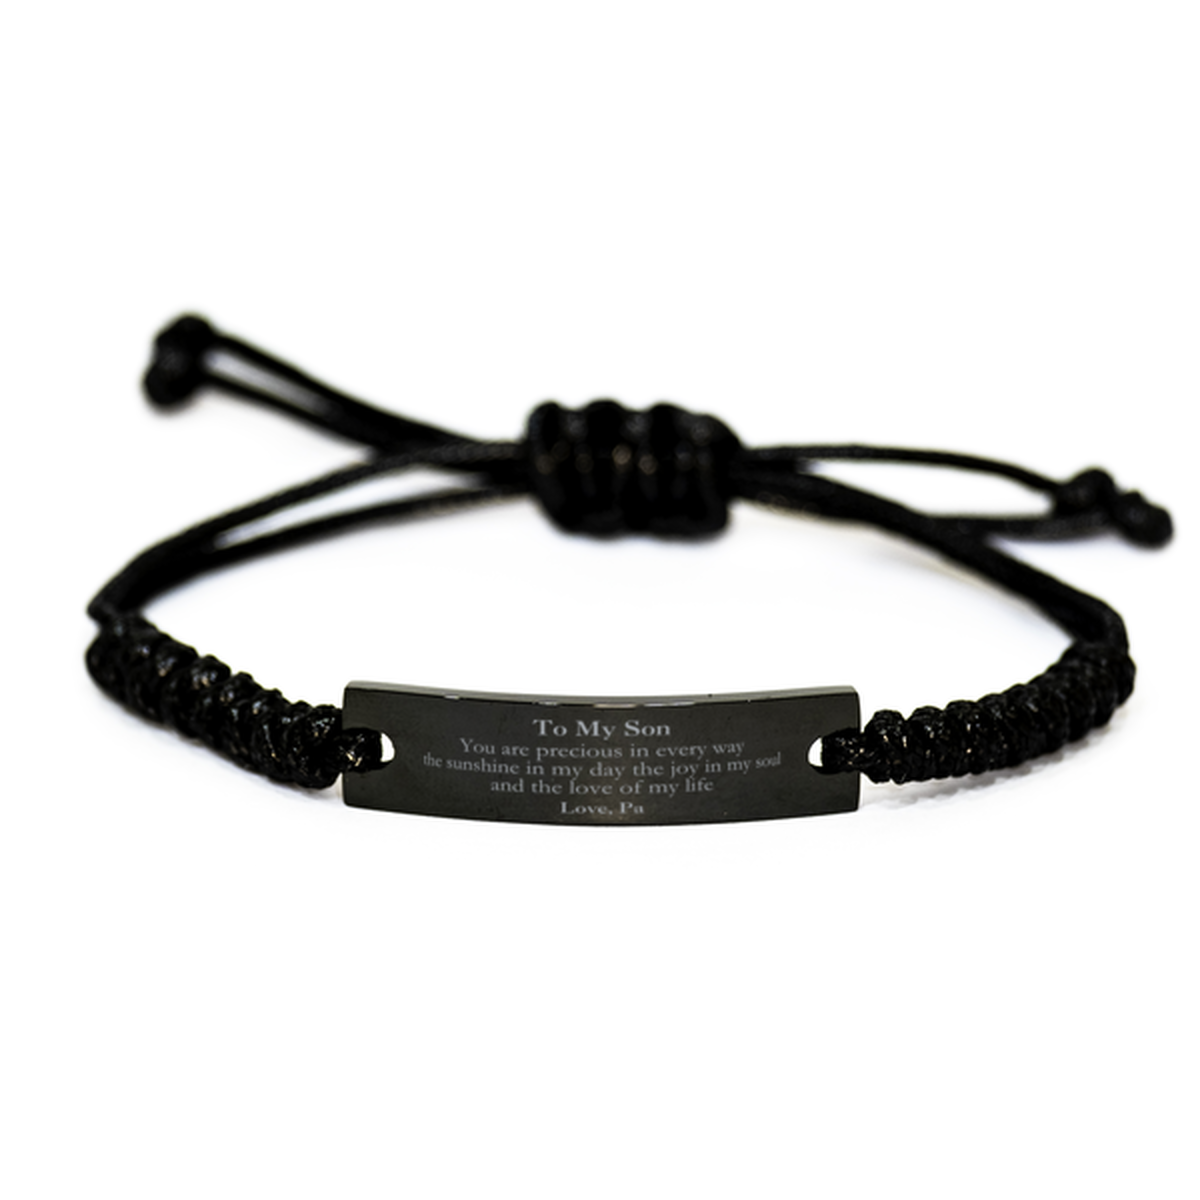 Graduation Gifts for Son Black Rope Bracelet Present from Pa, Christmas Son Birthday Gifts Son You are precious in every way the sunshine in my day. Love, Pa